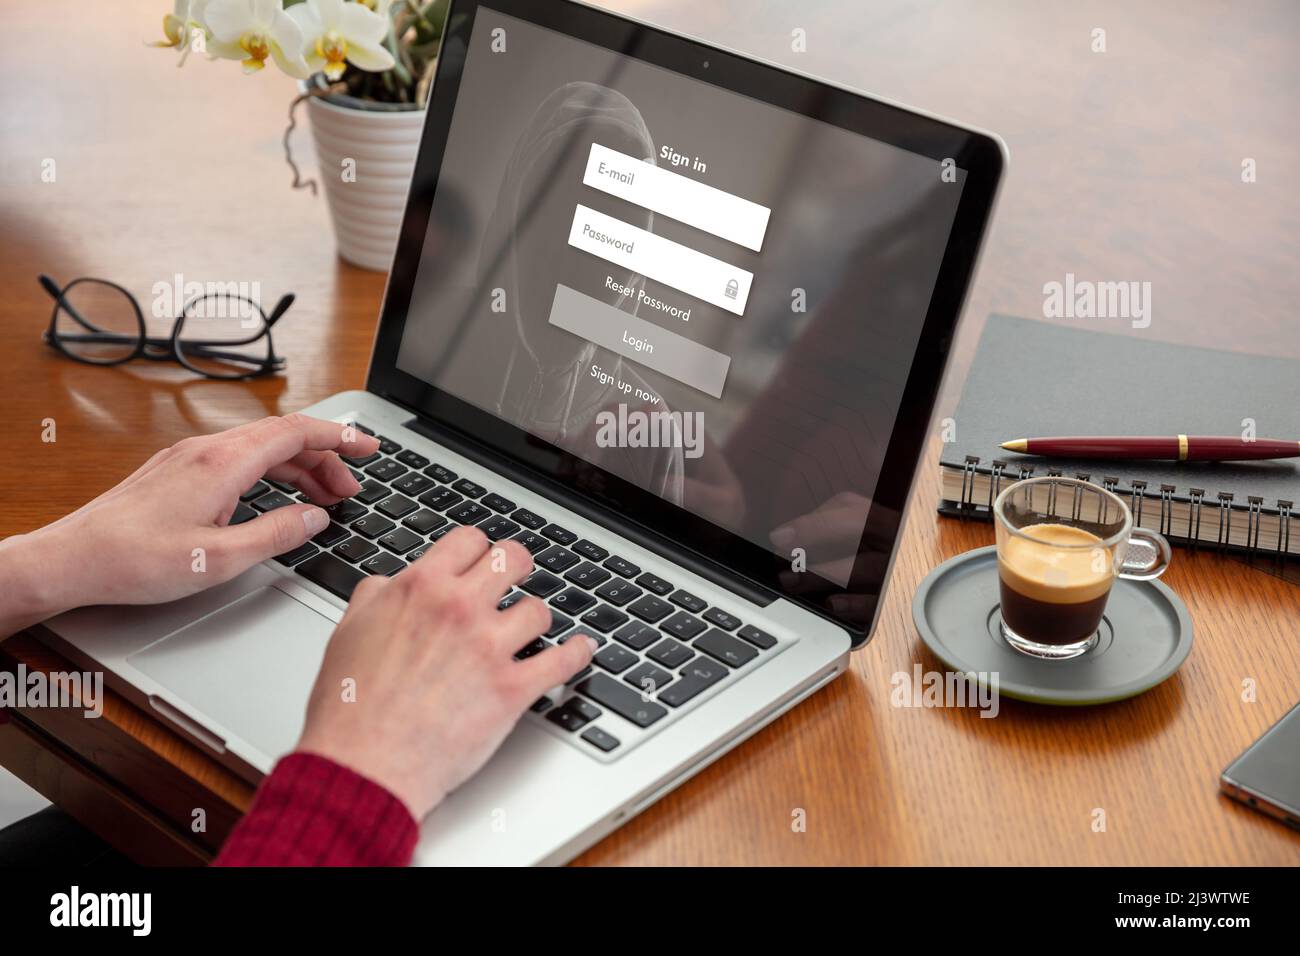 Password login on computer screen, cyber lock internet security concept. Woman working with a laptop. Office business wood table background. Stock Photo